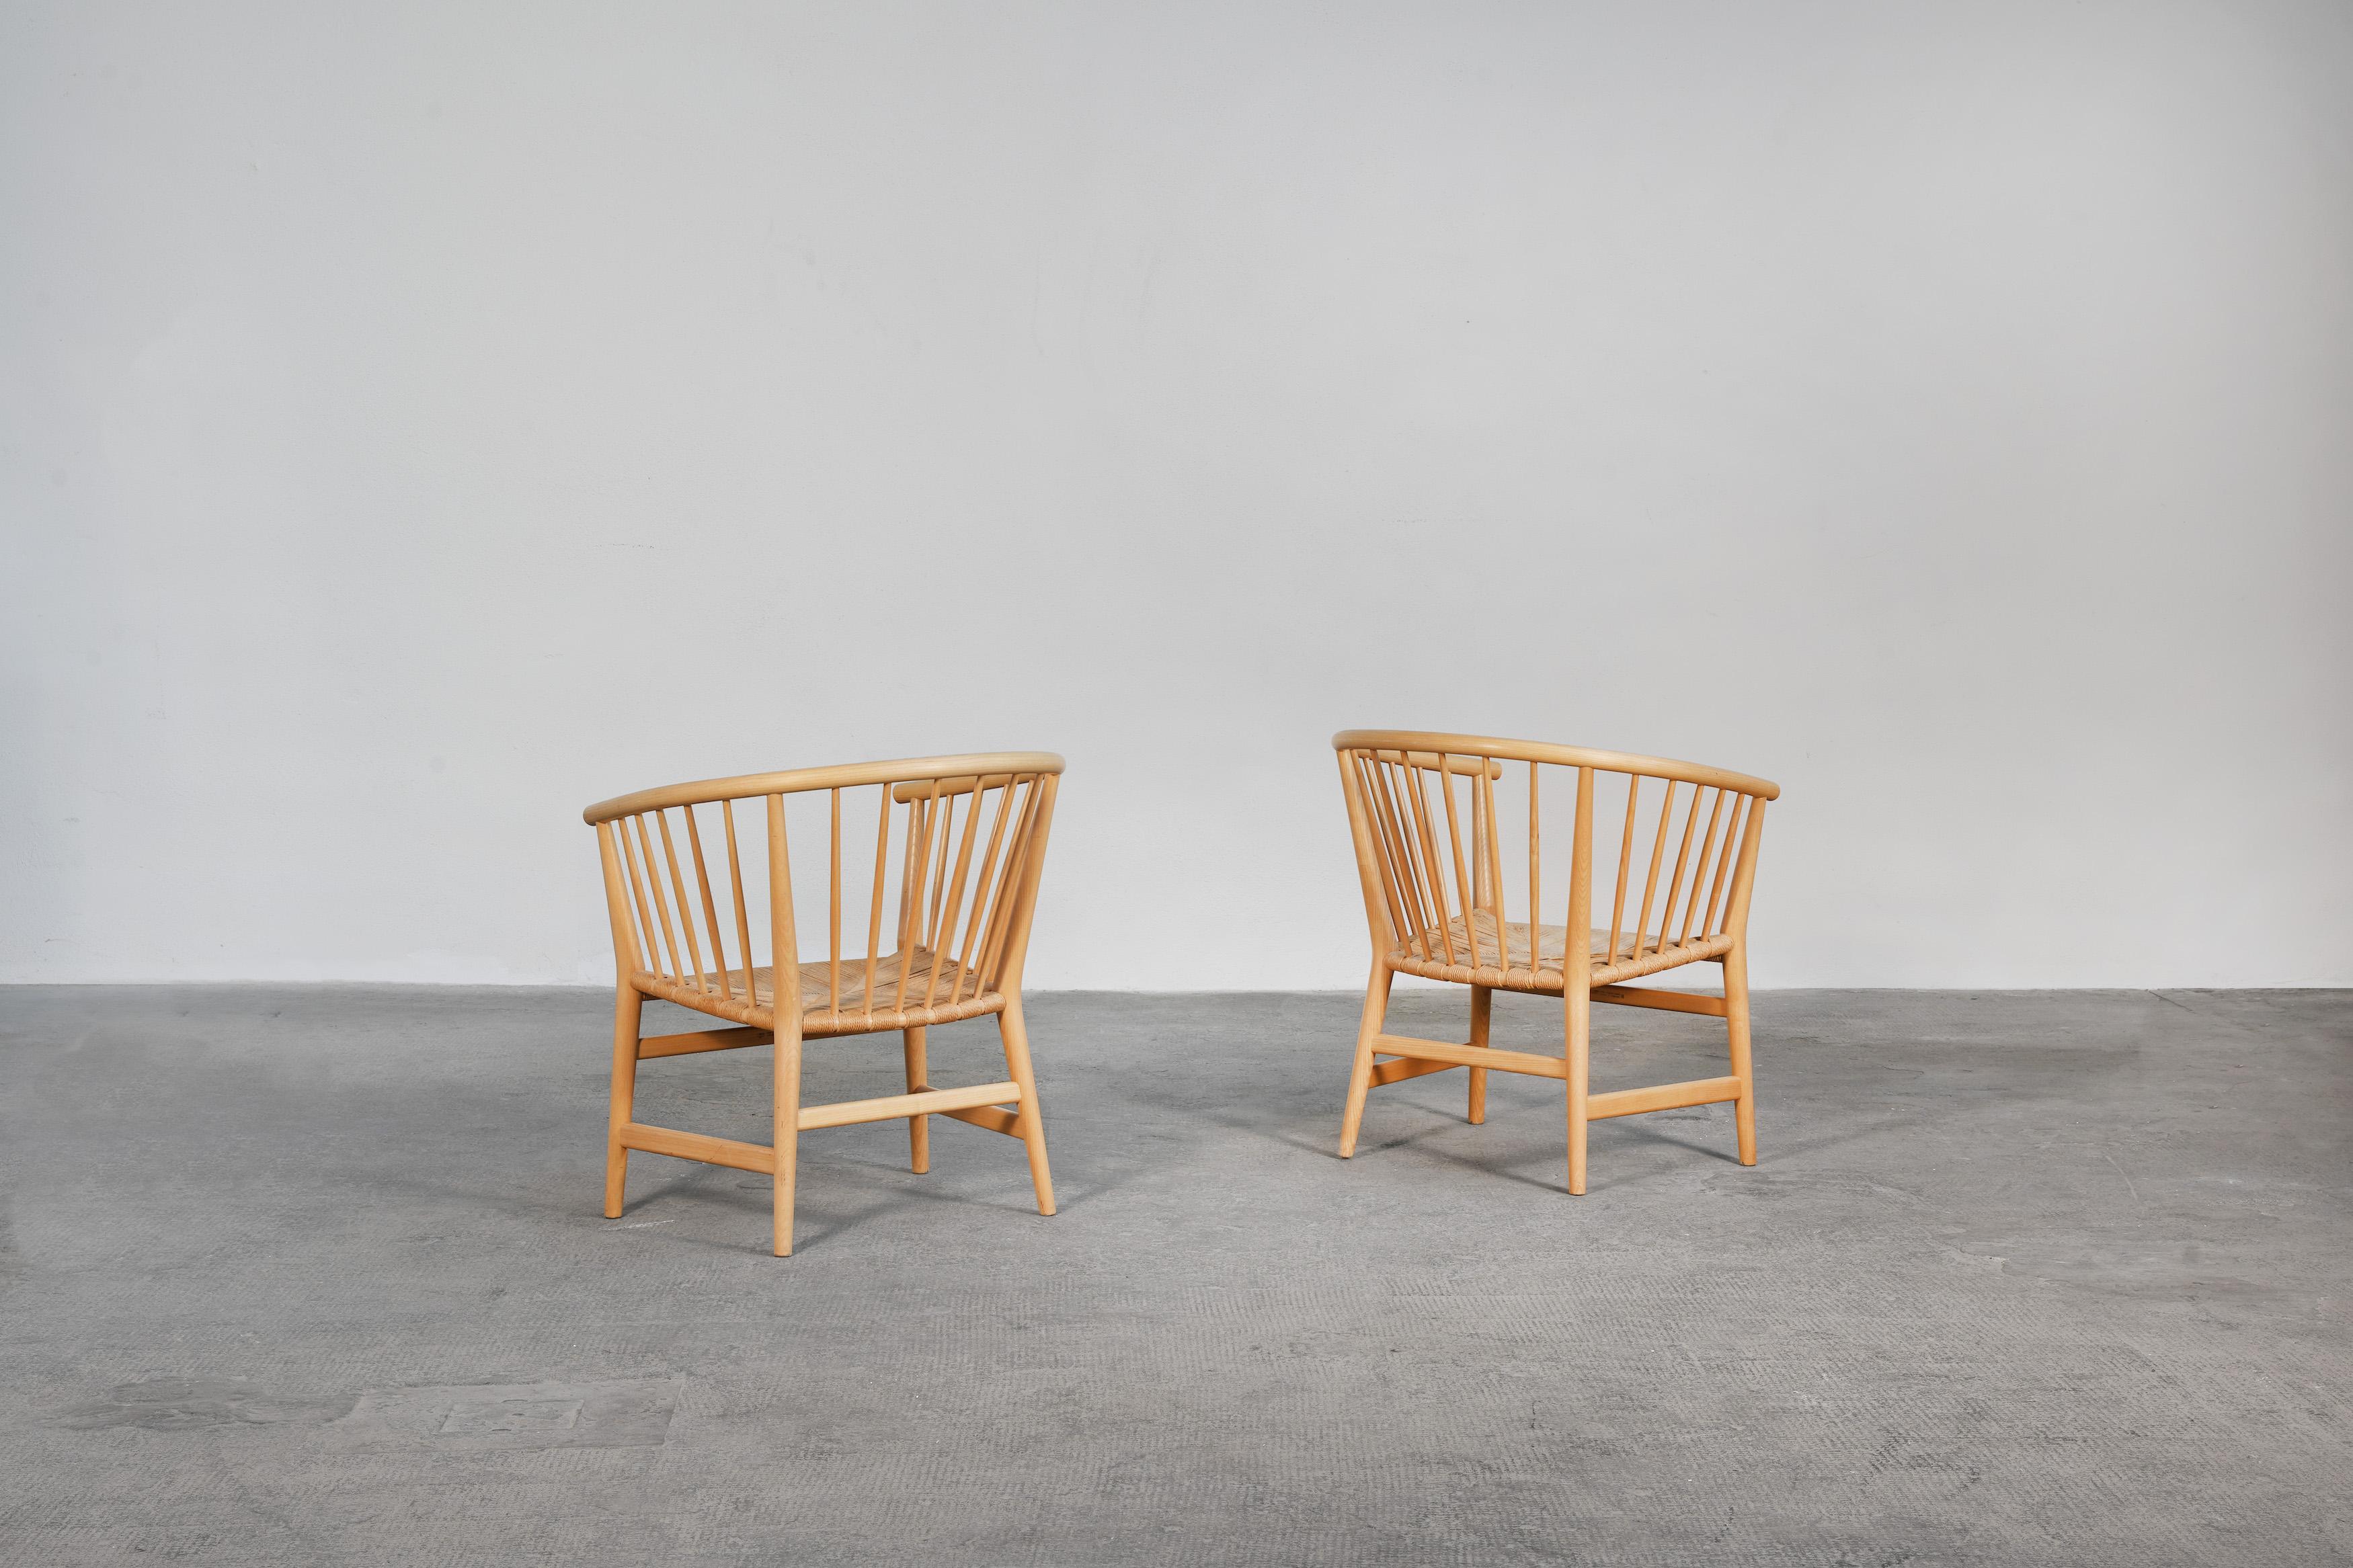 Pair of beautiful lounge chairs designed by Hans J. Wegner and produced by PP Møbler in Denmark, 1973.
Both chairs are made out of ash wood and come in a very good original condition, without any restorations or major damages. Both are ready for